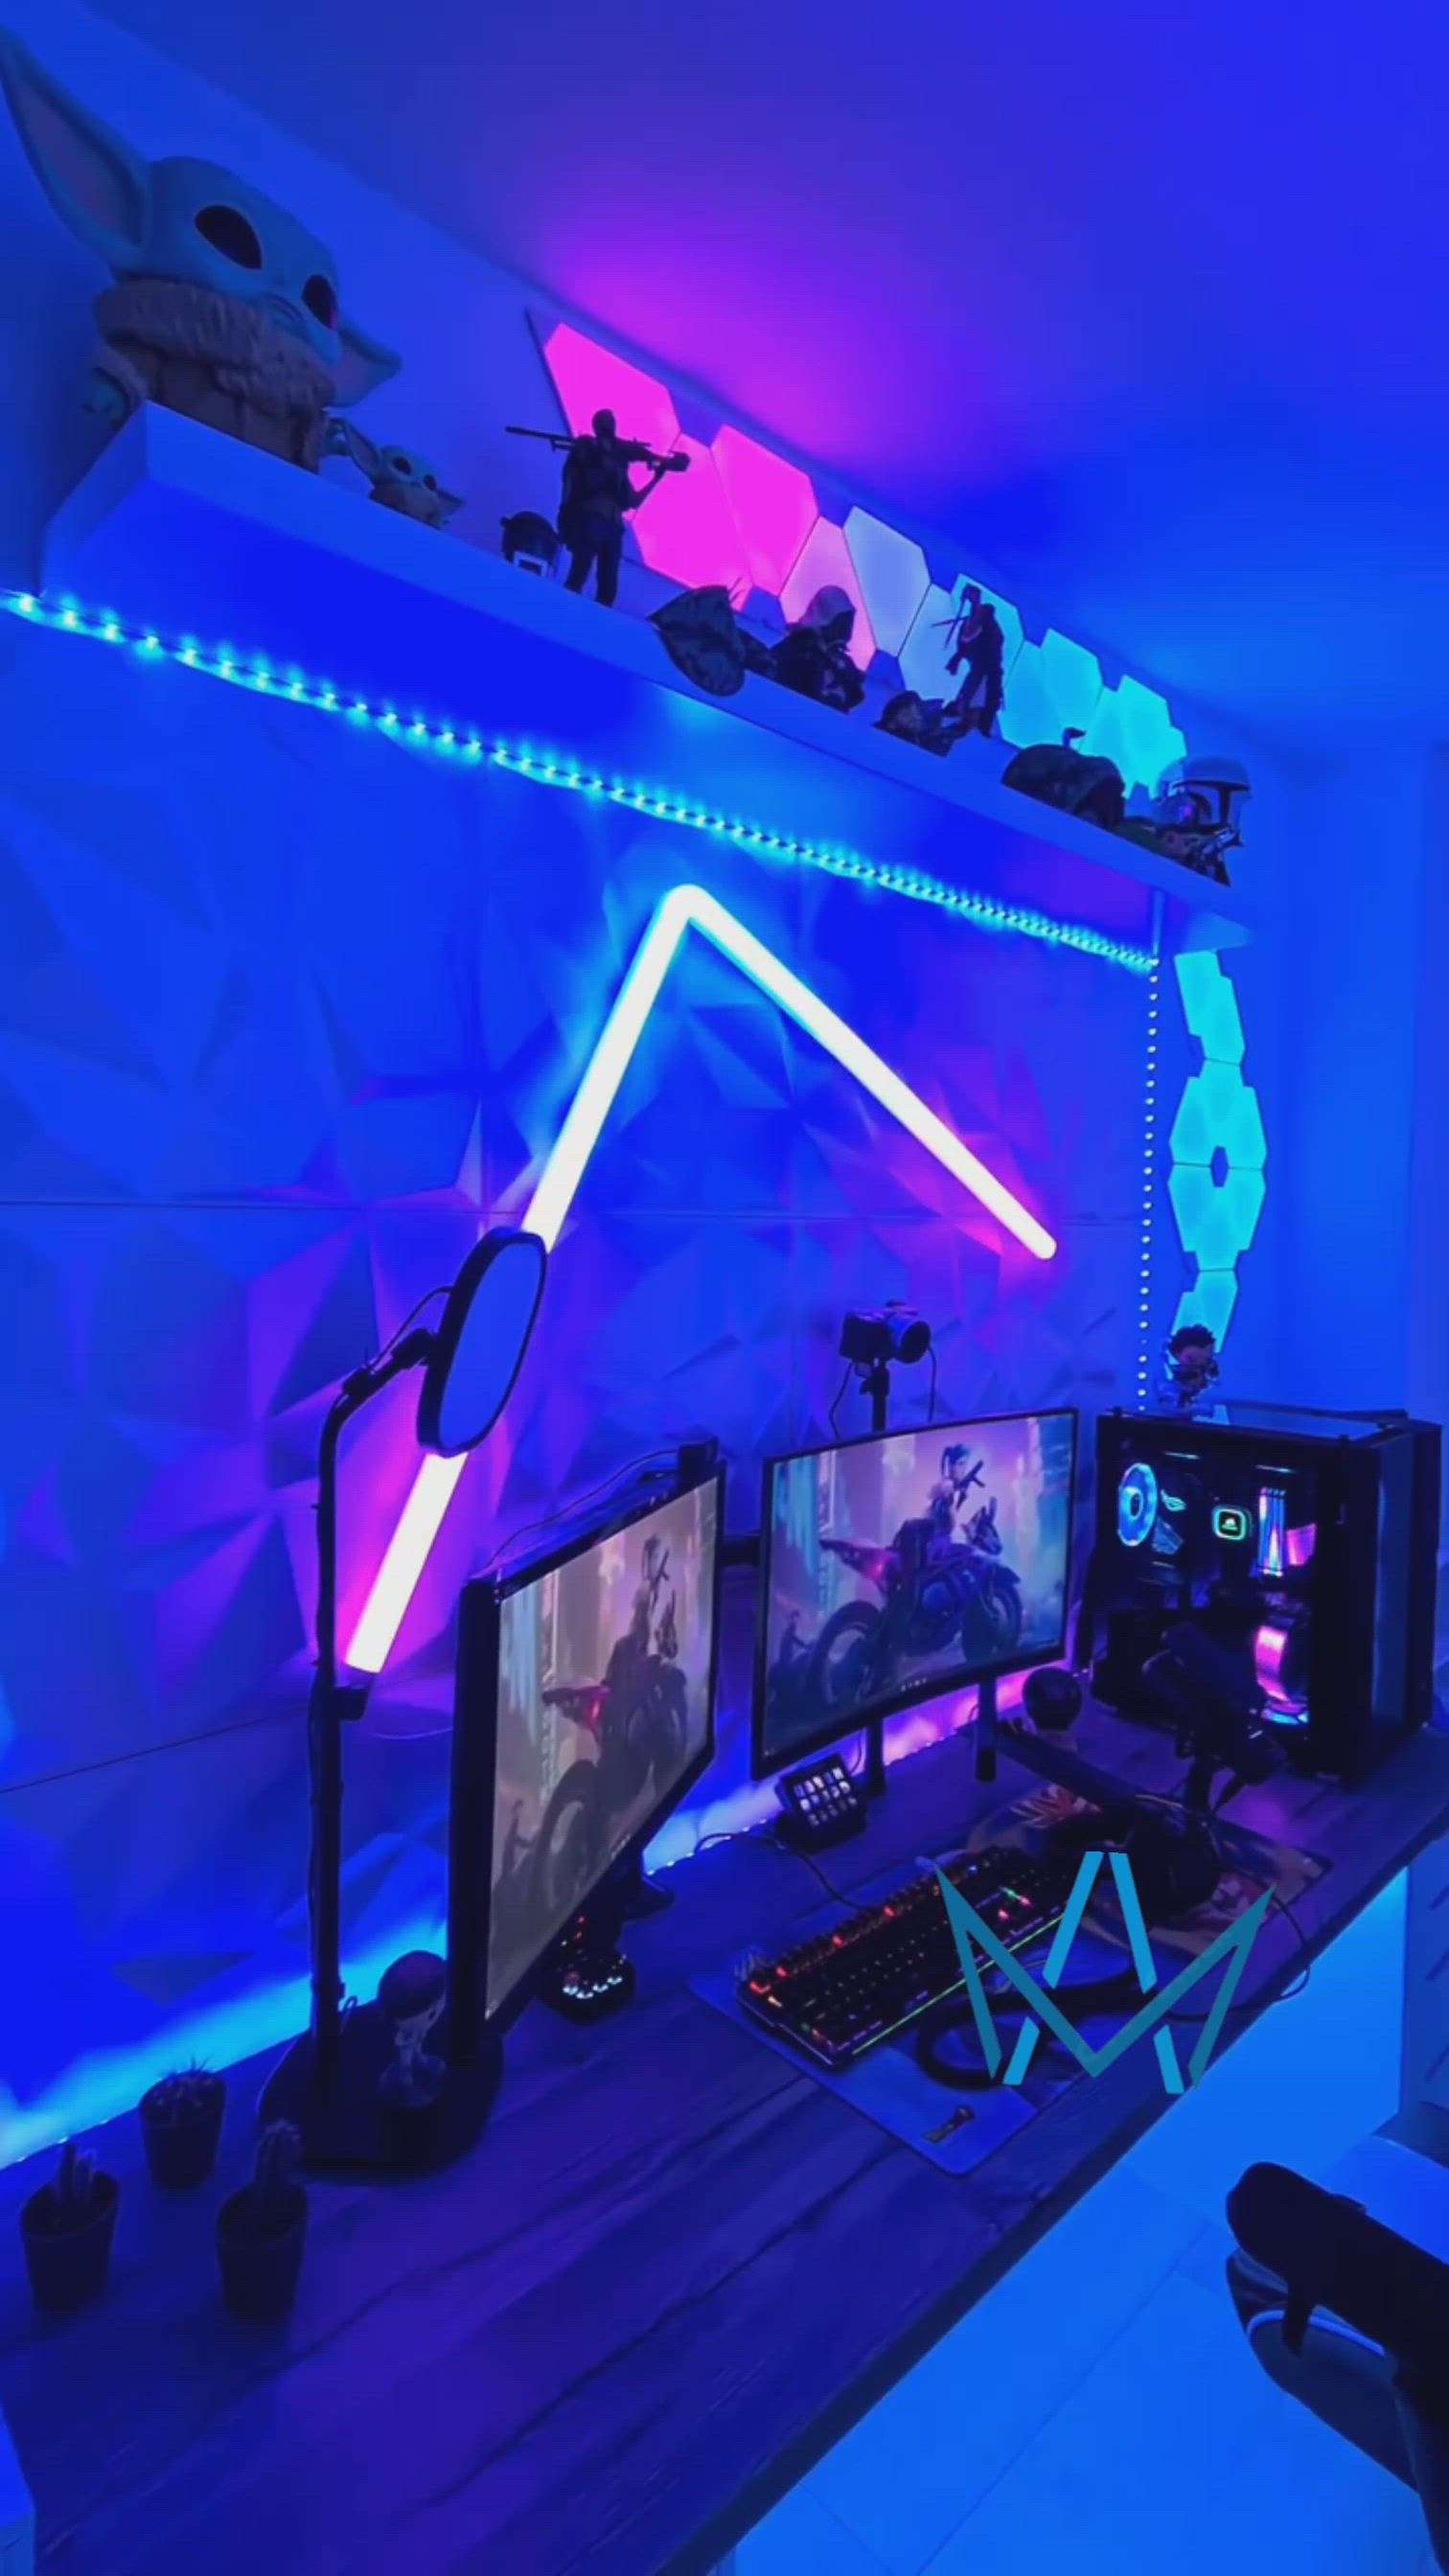 Gaming room done right. 
A gamers dream come true with the aesthetics on another level 
#nanoleaf

Contact us for more details

#smartliving #smarthome #smartblinds #homeautomationindia #homedecor #homeautomationexperts #iot #internetofthings #smartswitches #automation #smartlights #smartindia #homeautomationsystem #smartcurtain #smartliving  #smartlights #zwaveplus #zwave #luxurylifestyle #luxury #theatreroof #opticalfibre #galaxyroof #hometheatre #hometheater #hometheaterexperts #sky #royalautomation #ifttt
#shootingstar